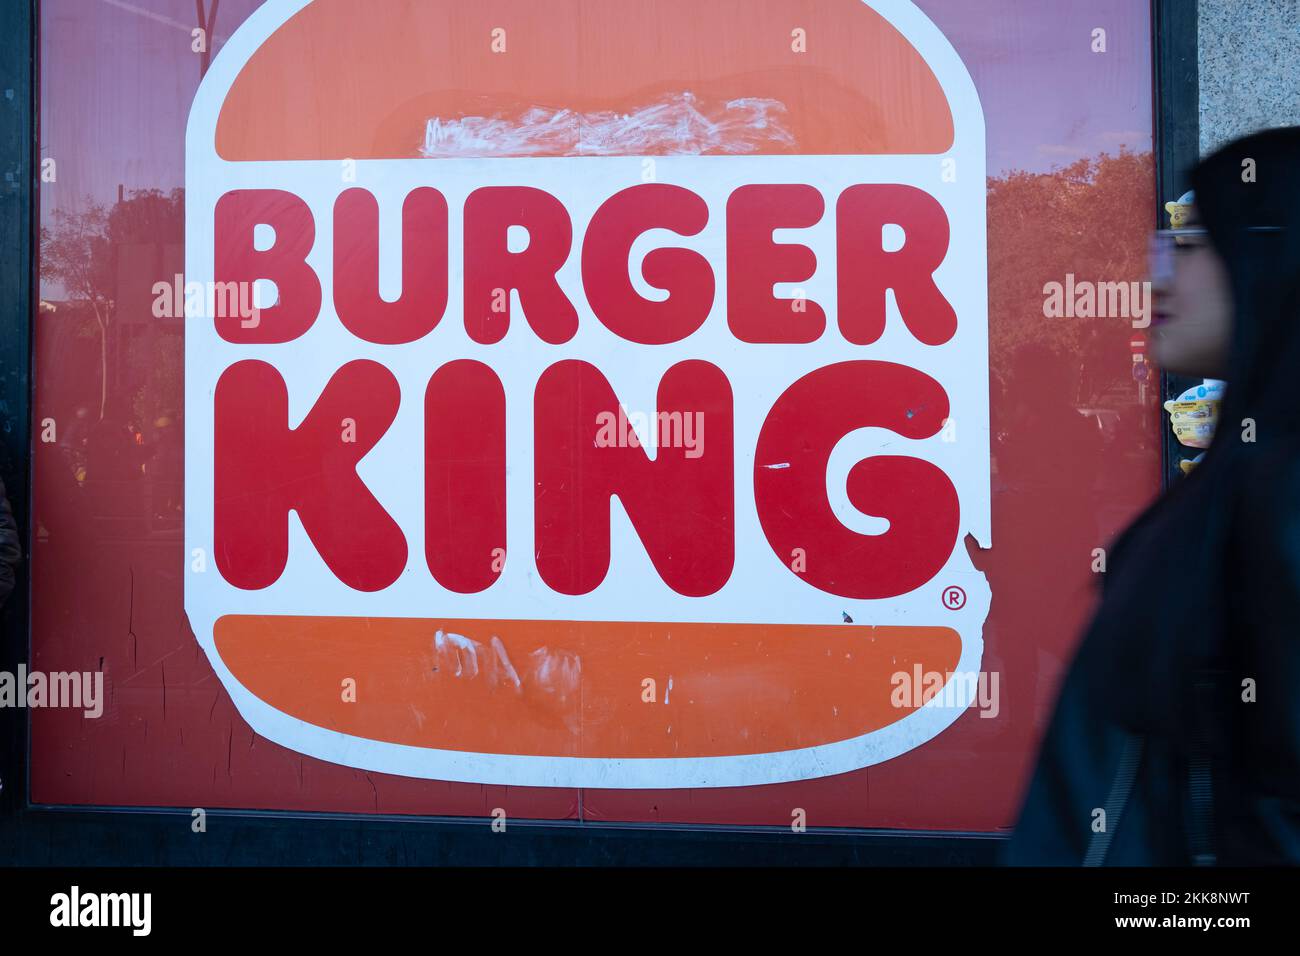 Burger King, Subway, M&S: Western brands in Russian franchise deals